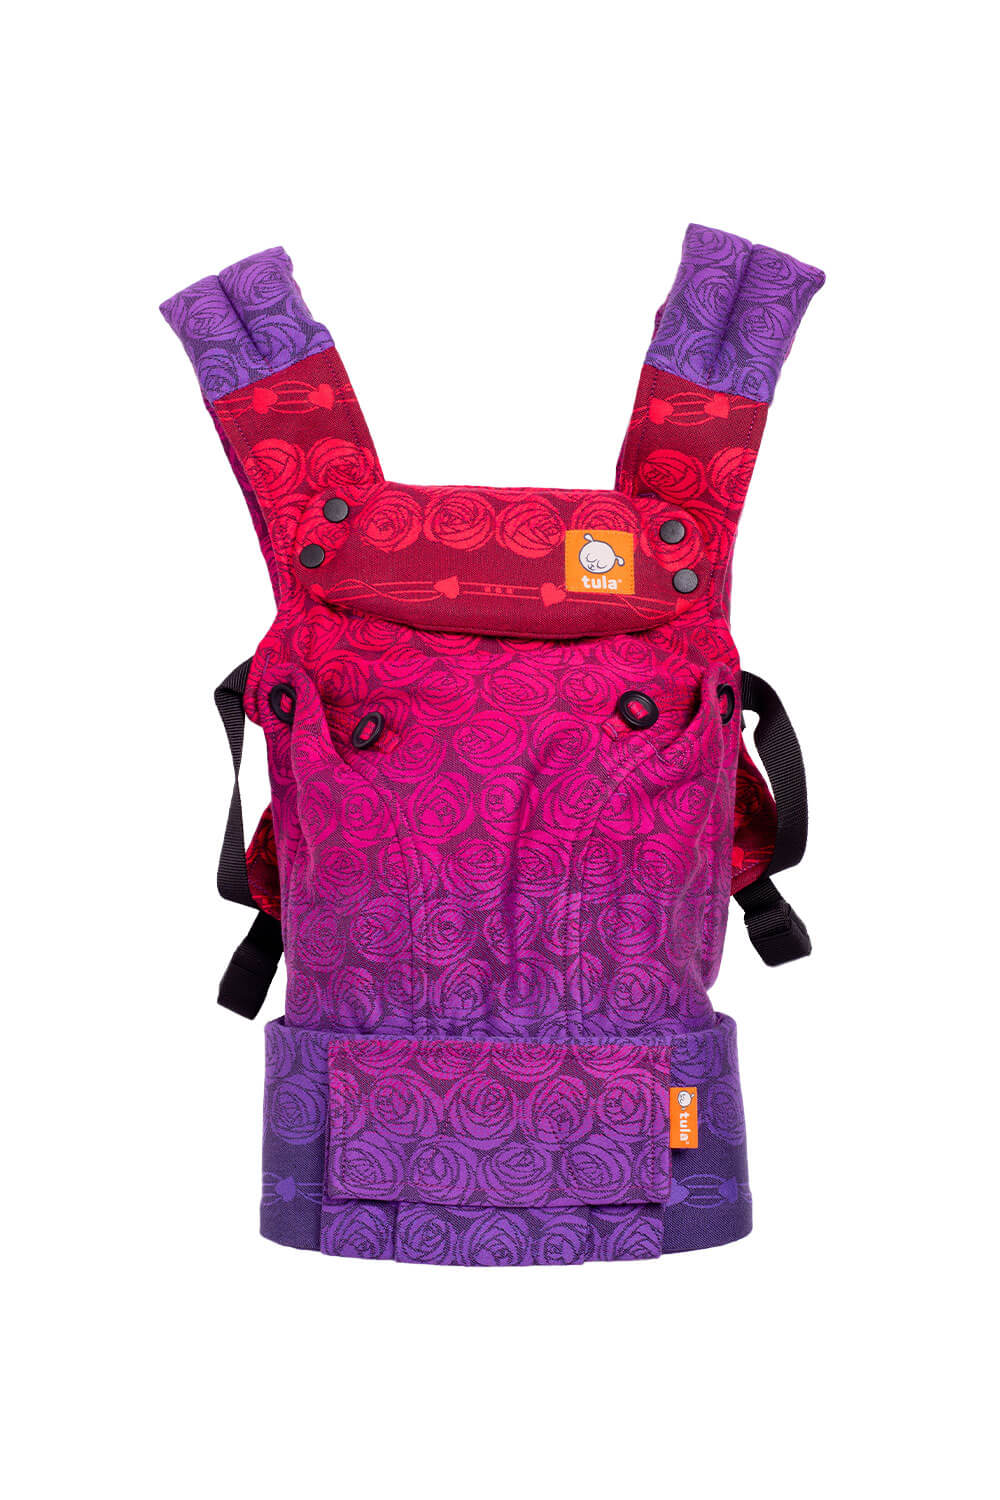 Roses Berry Crush - Signature Woven Explore Baby Carrier